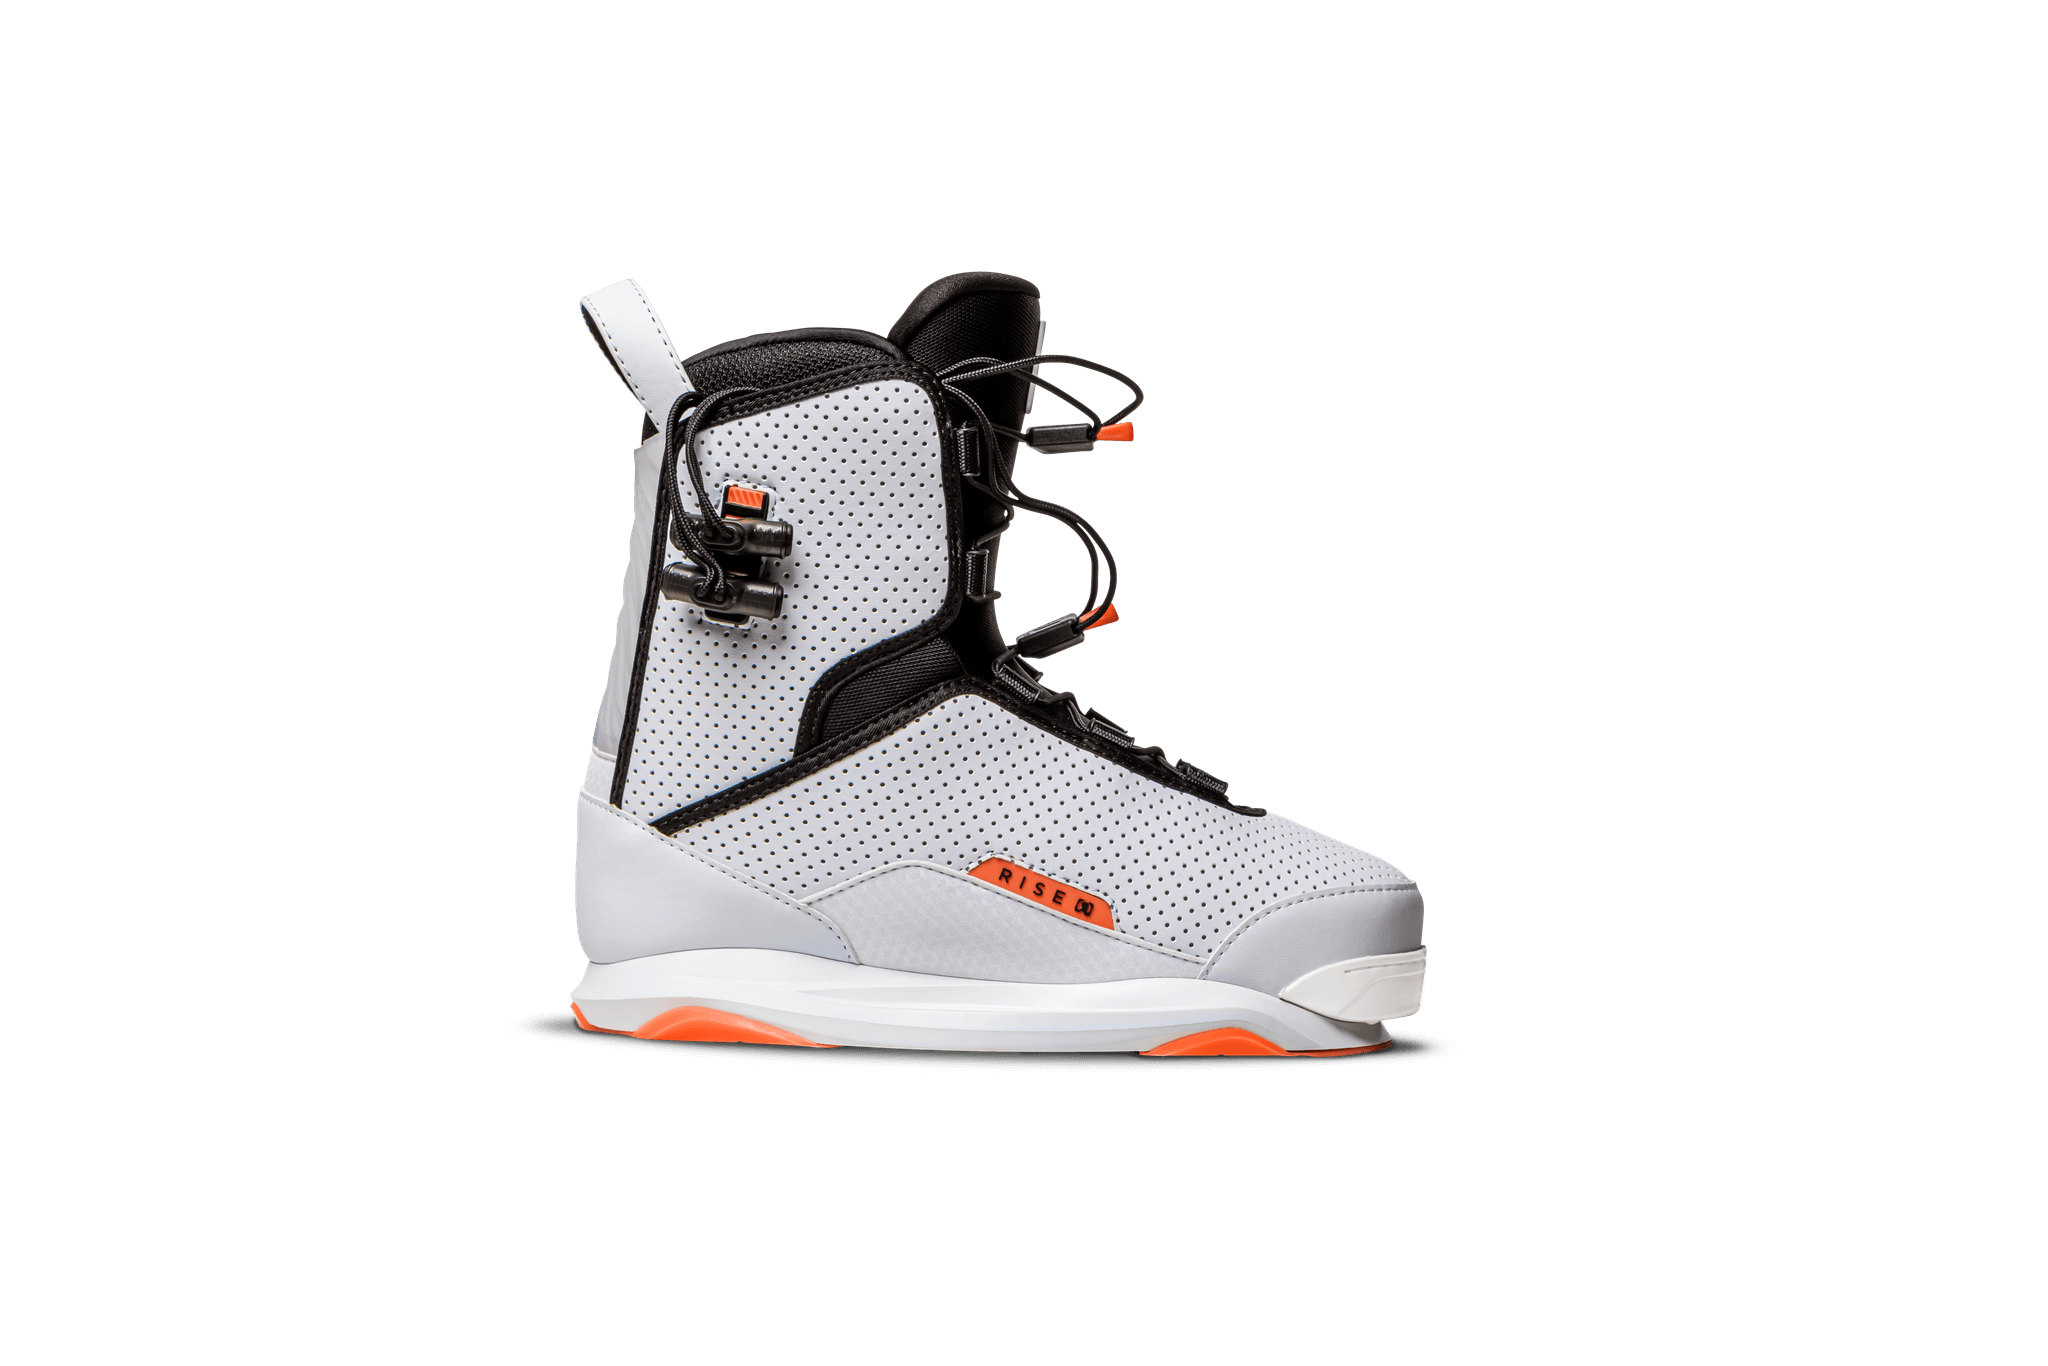 A pair of white and orange Ronix 2023 Women's Rise Bindings from the women's line, accompanied by an Intuition+ liner, showcased against a sleek black background.